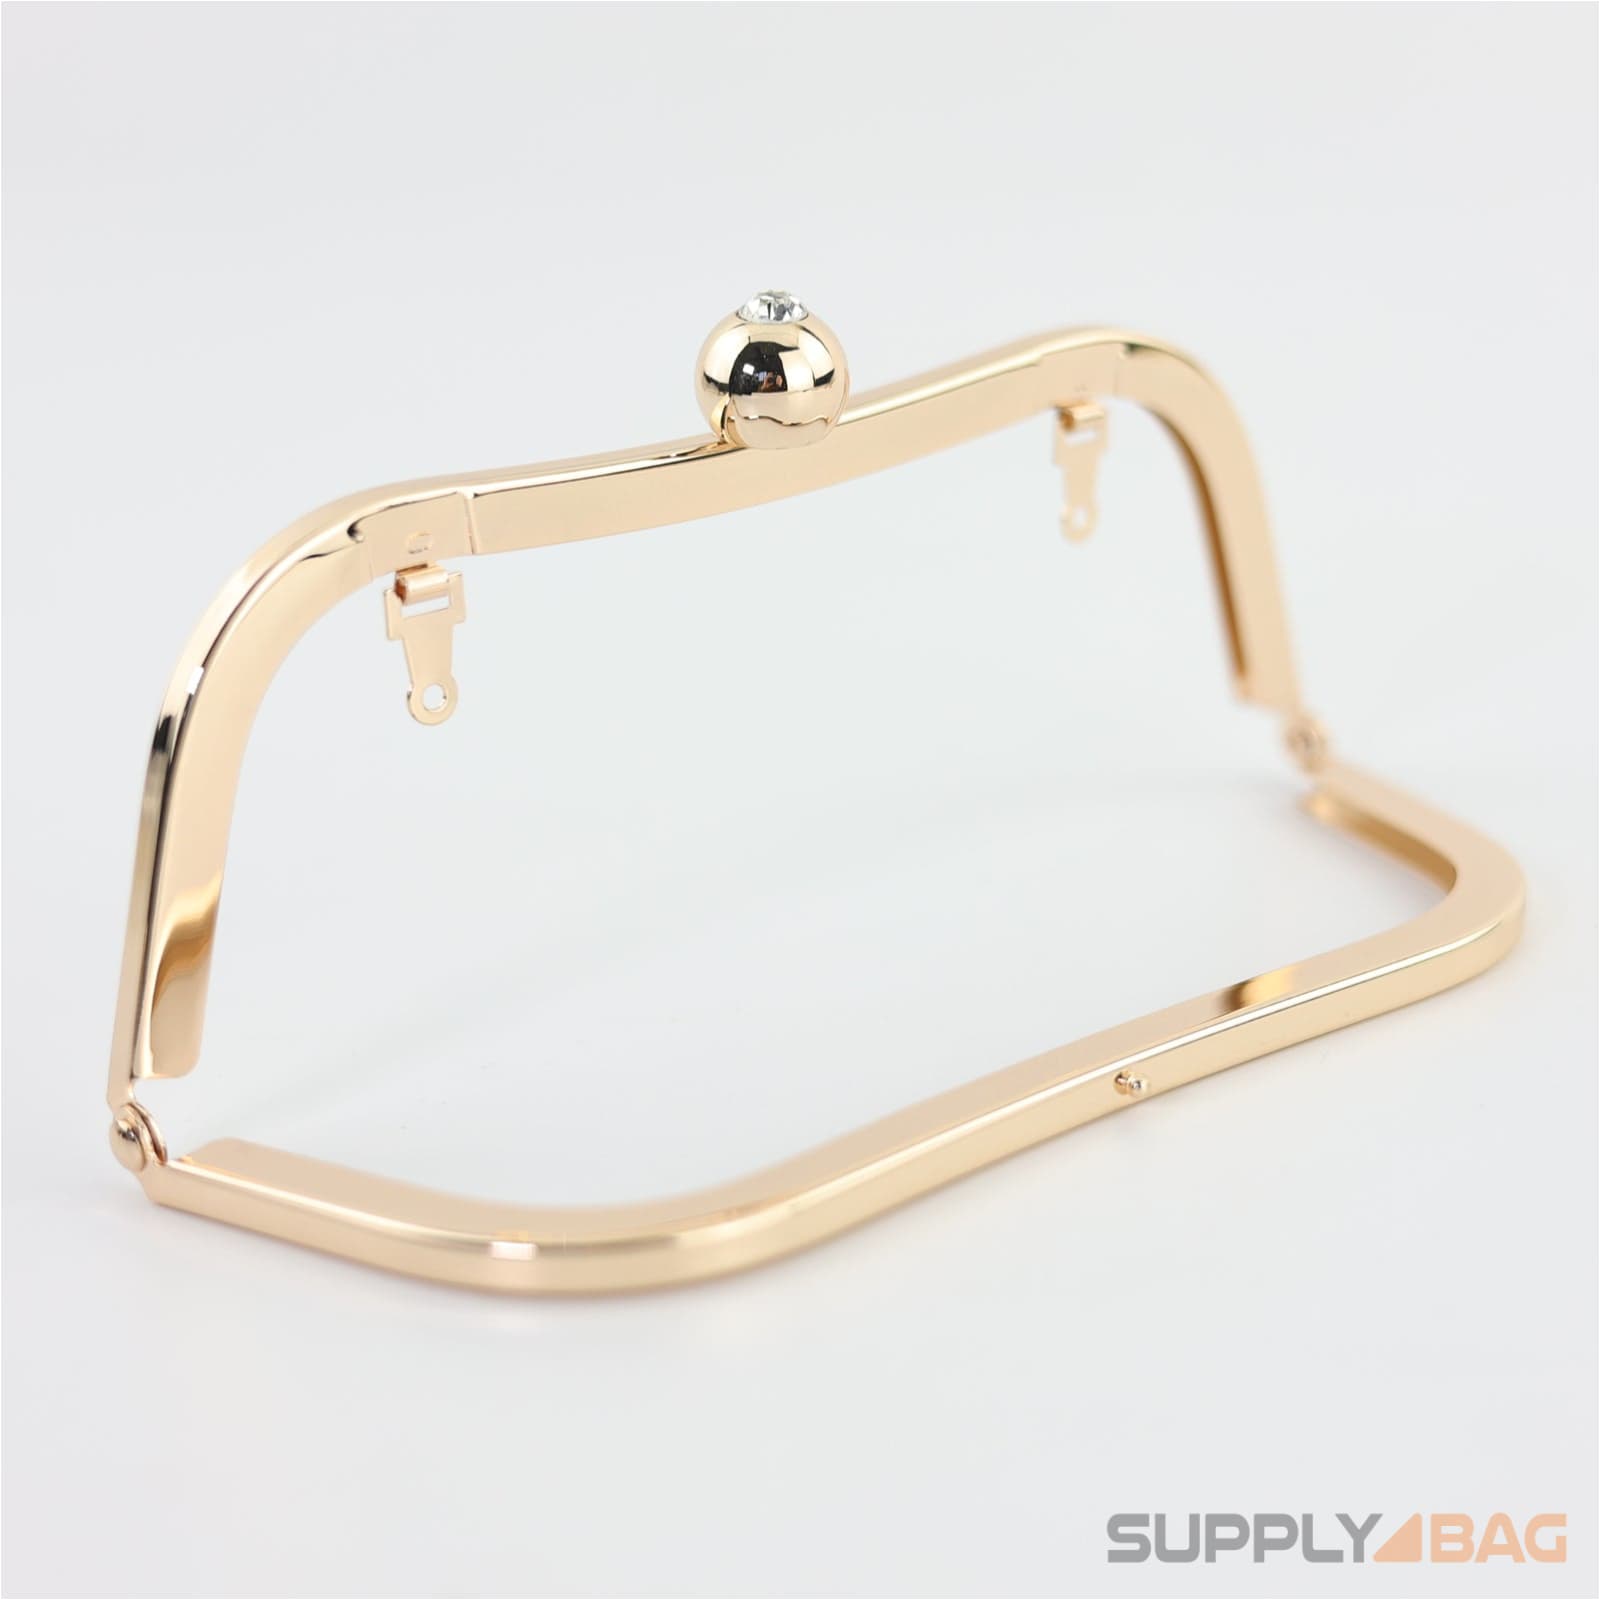 7 x 2 1/2 inch - single ball clasp - gold metal purse frame with chain